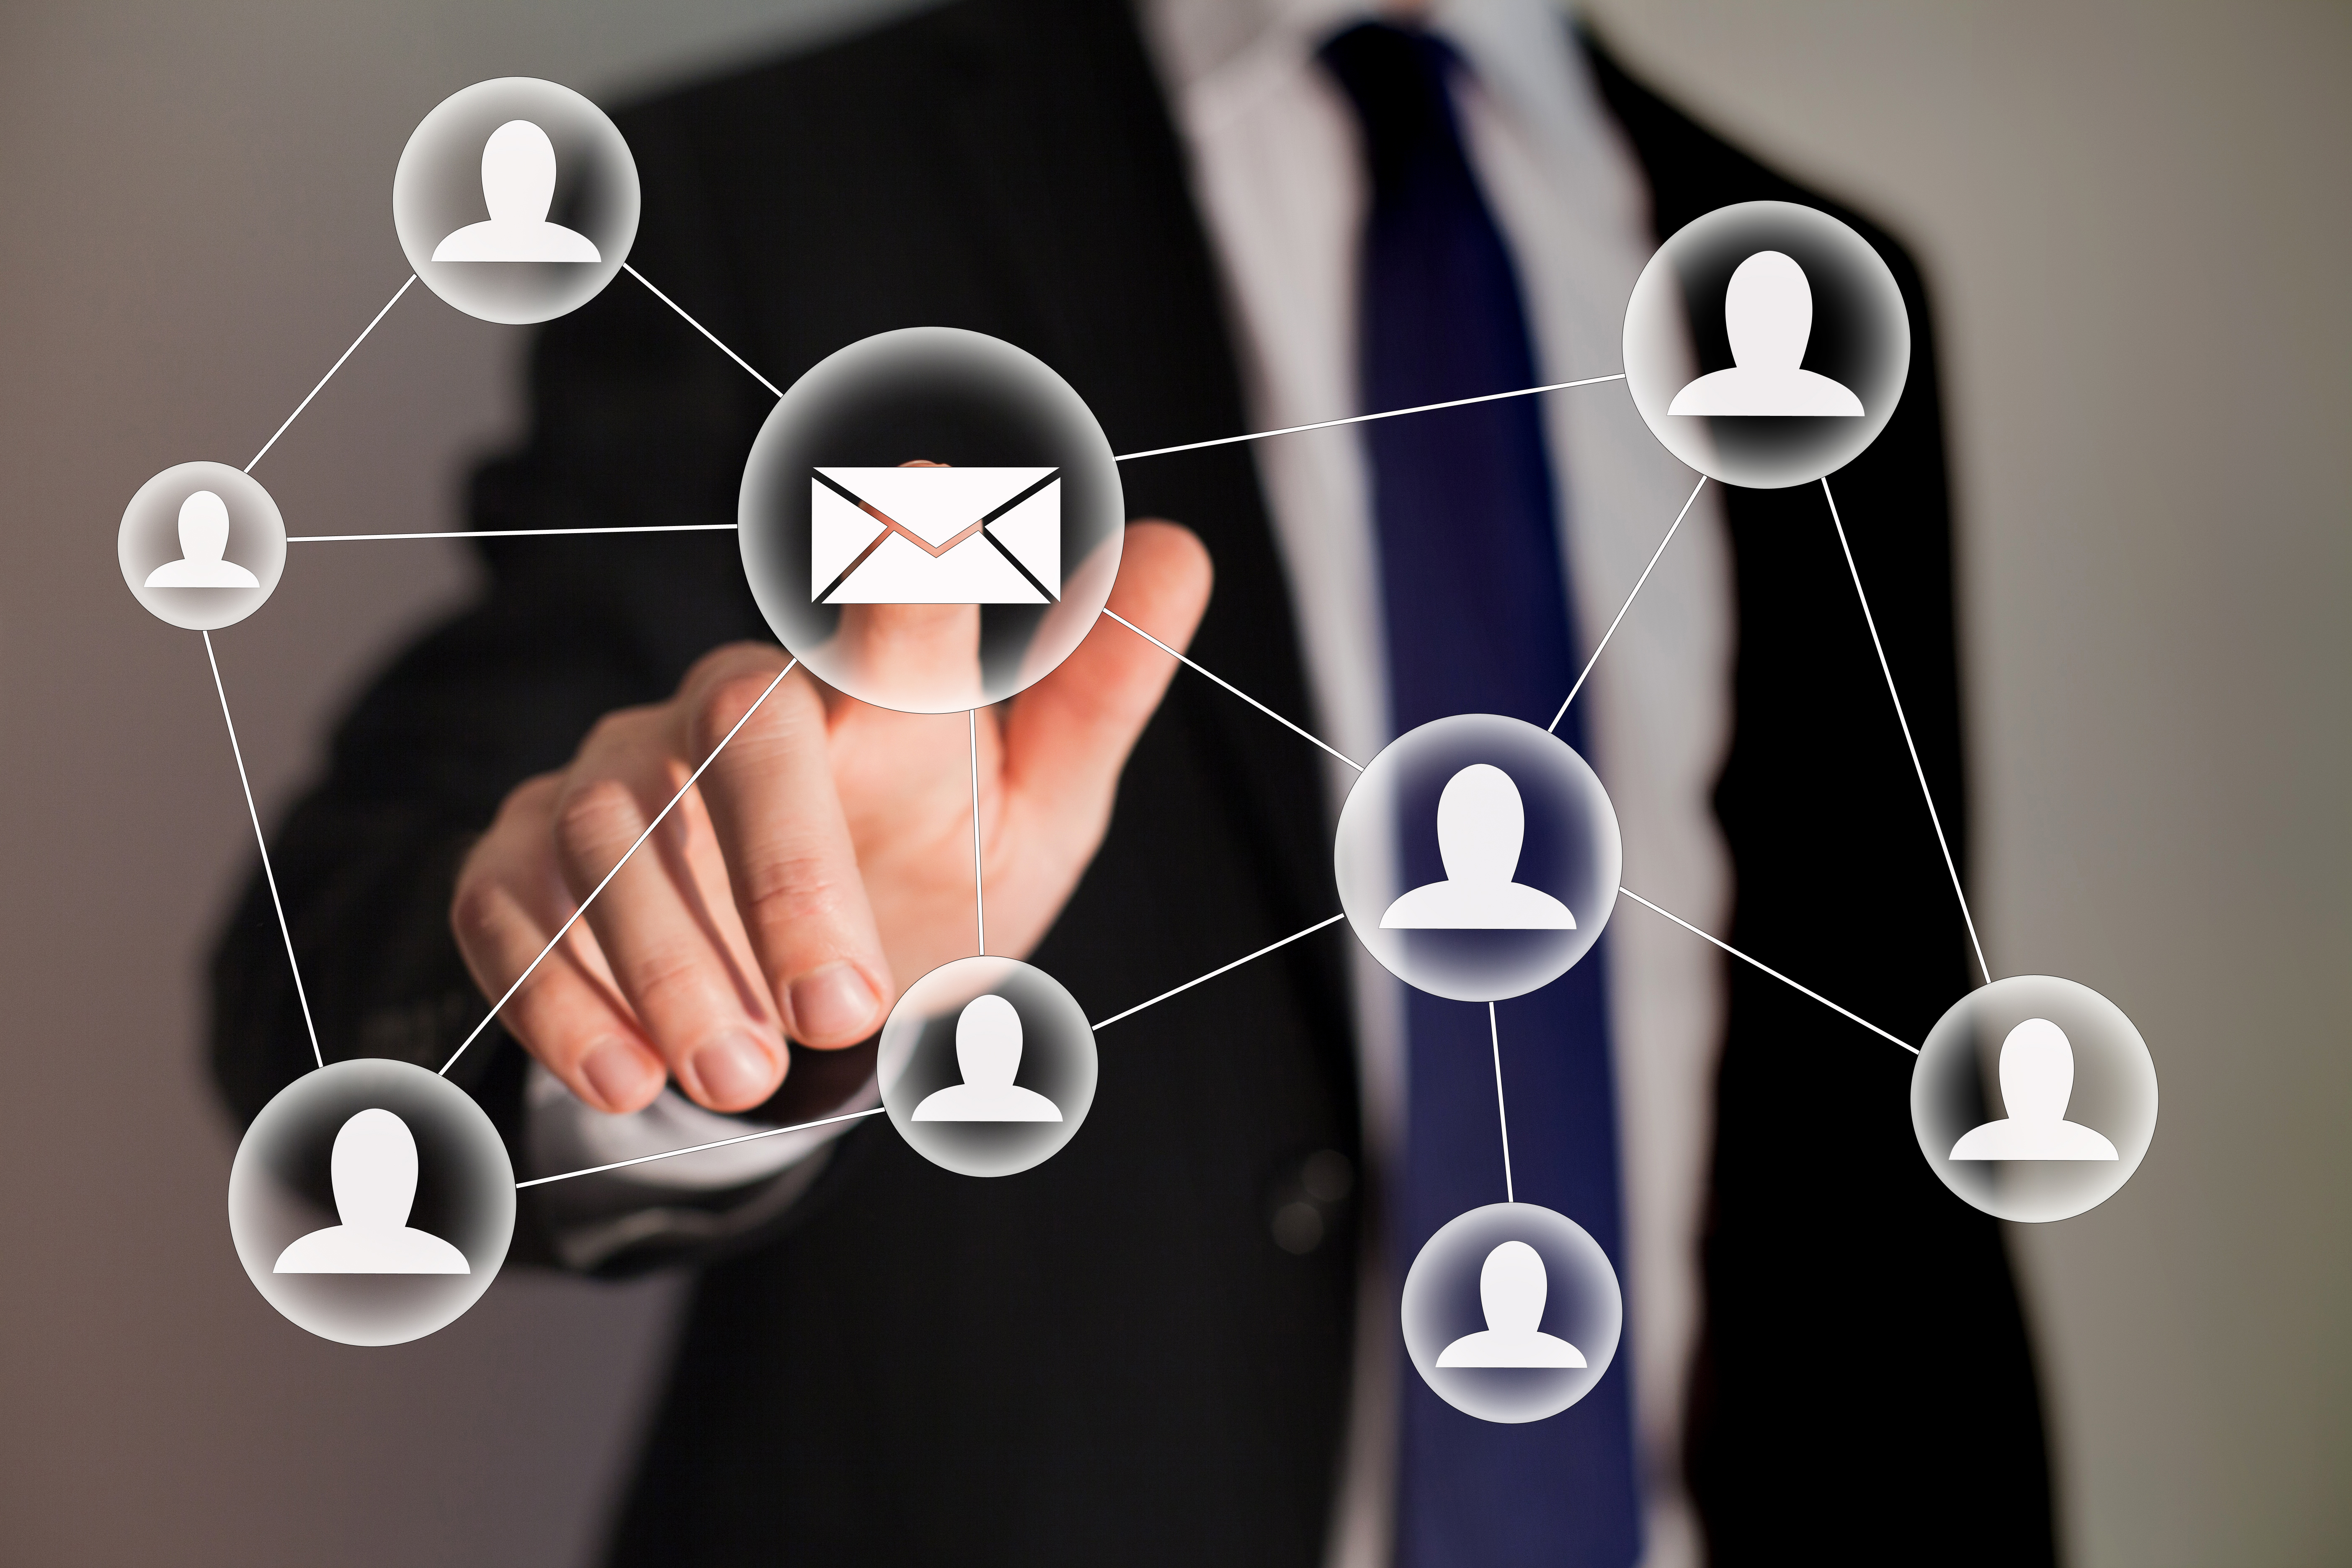 Email marketing can give small businesses a boost